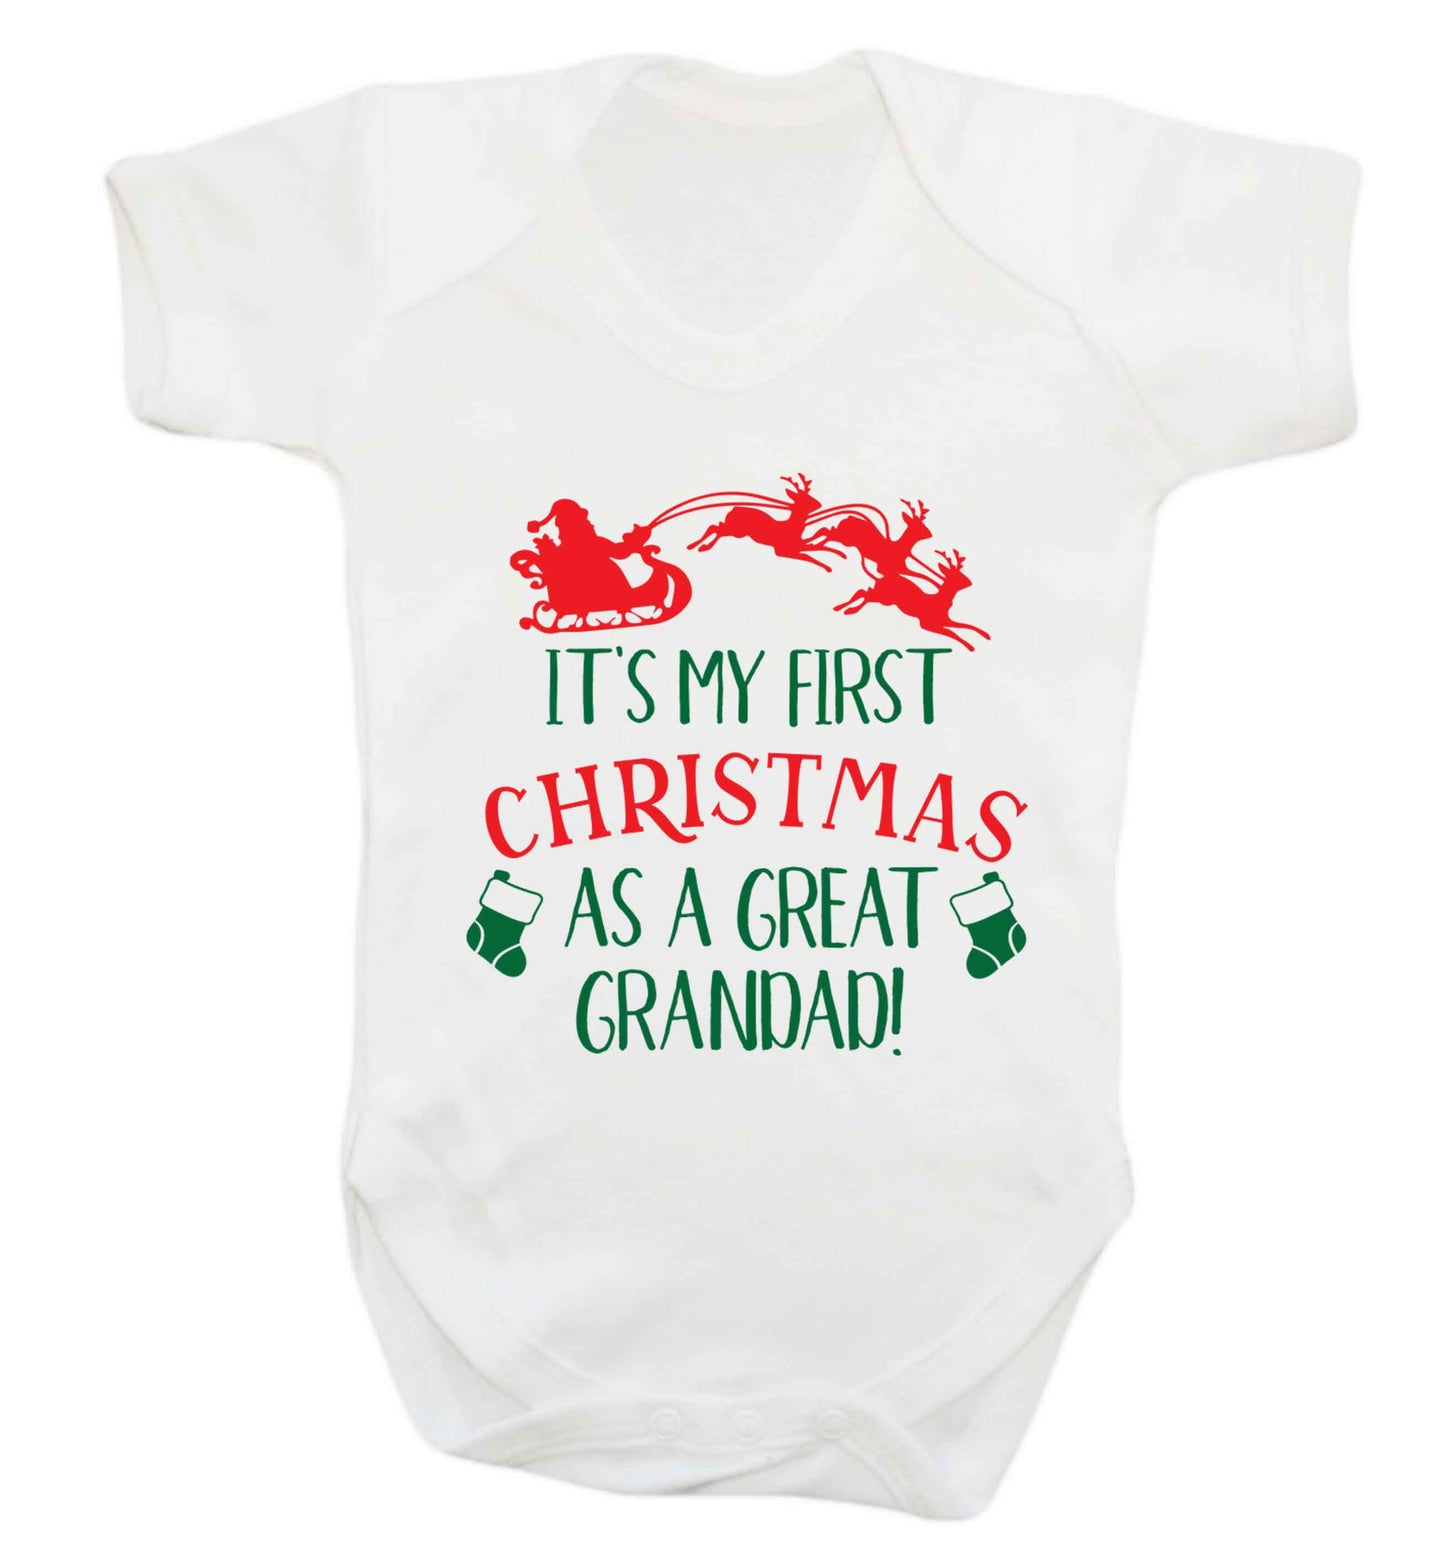 It's my first Christmas as a great grandad! Baby Vest white 18-24 months